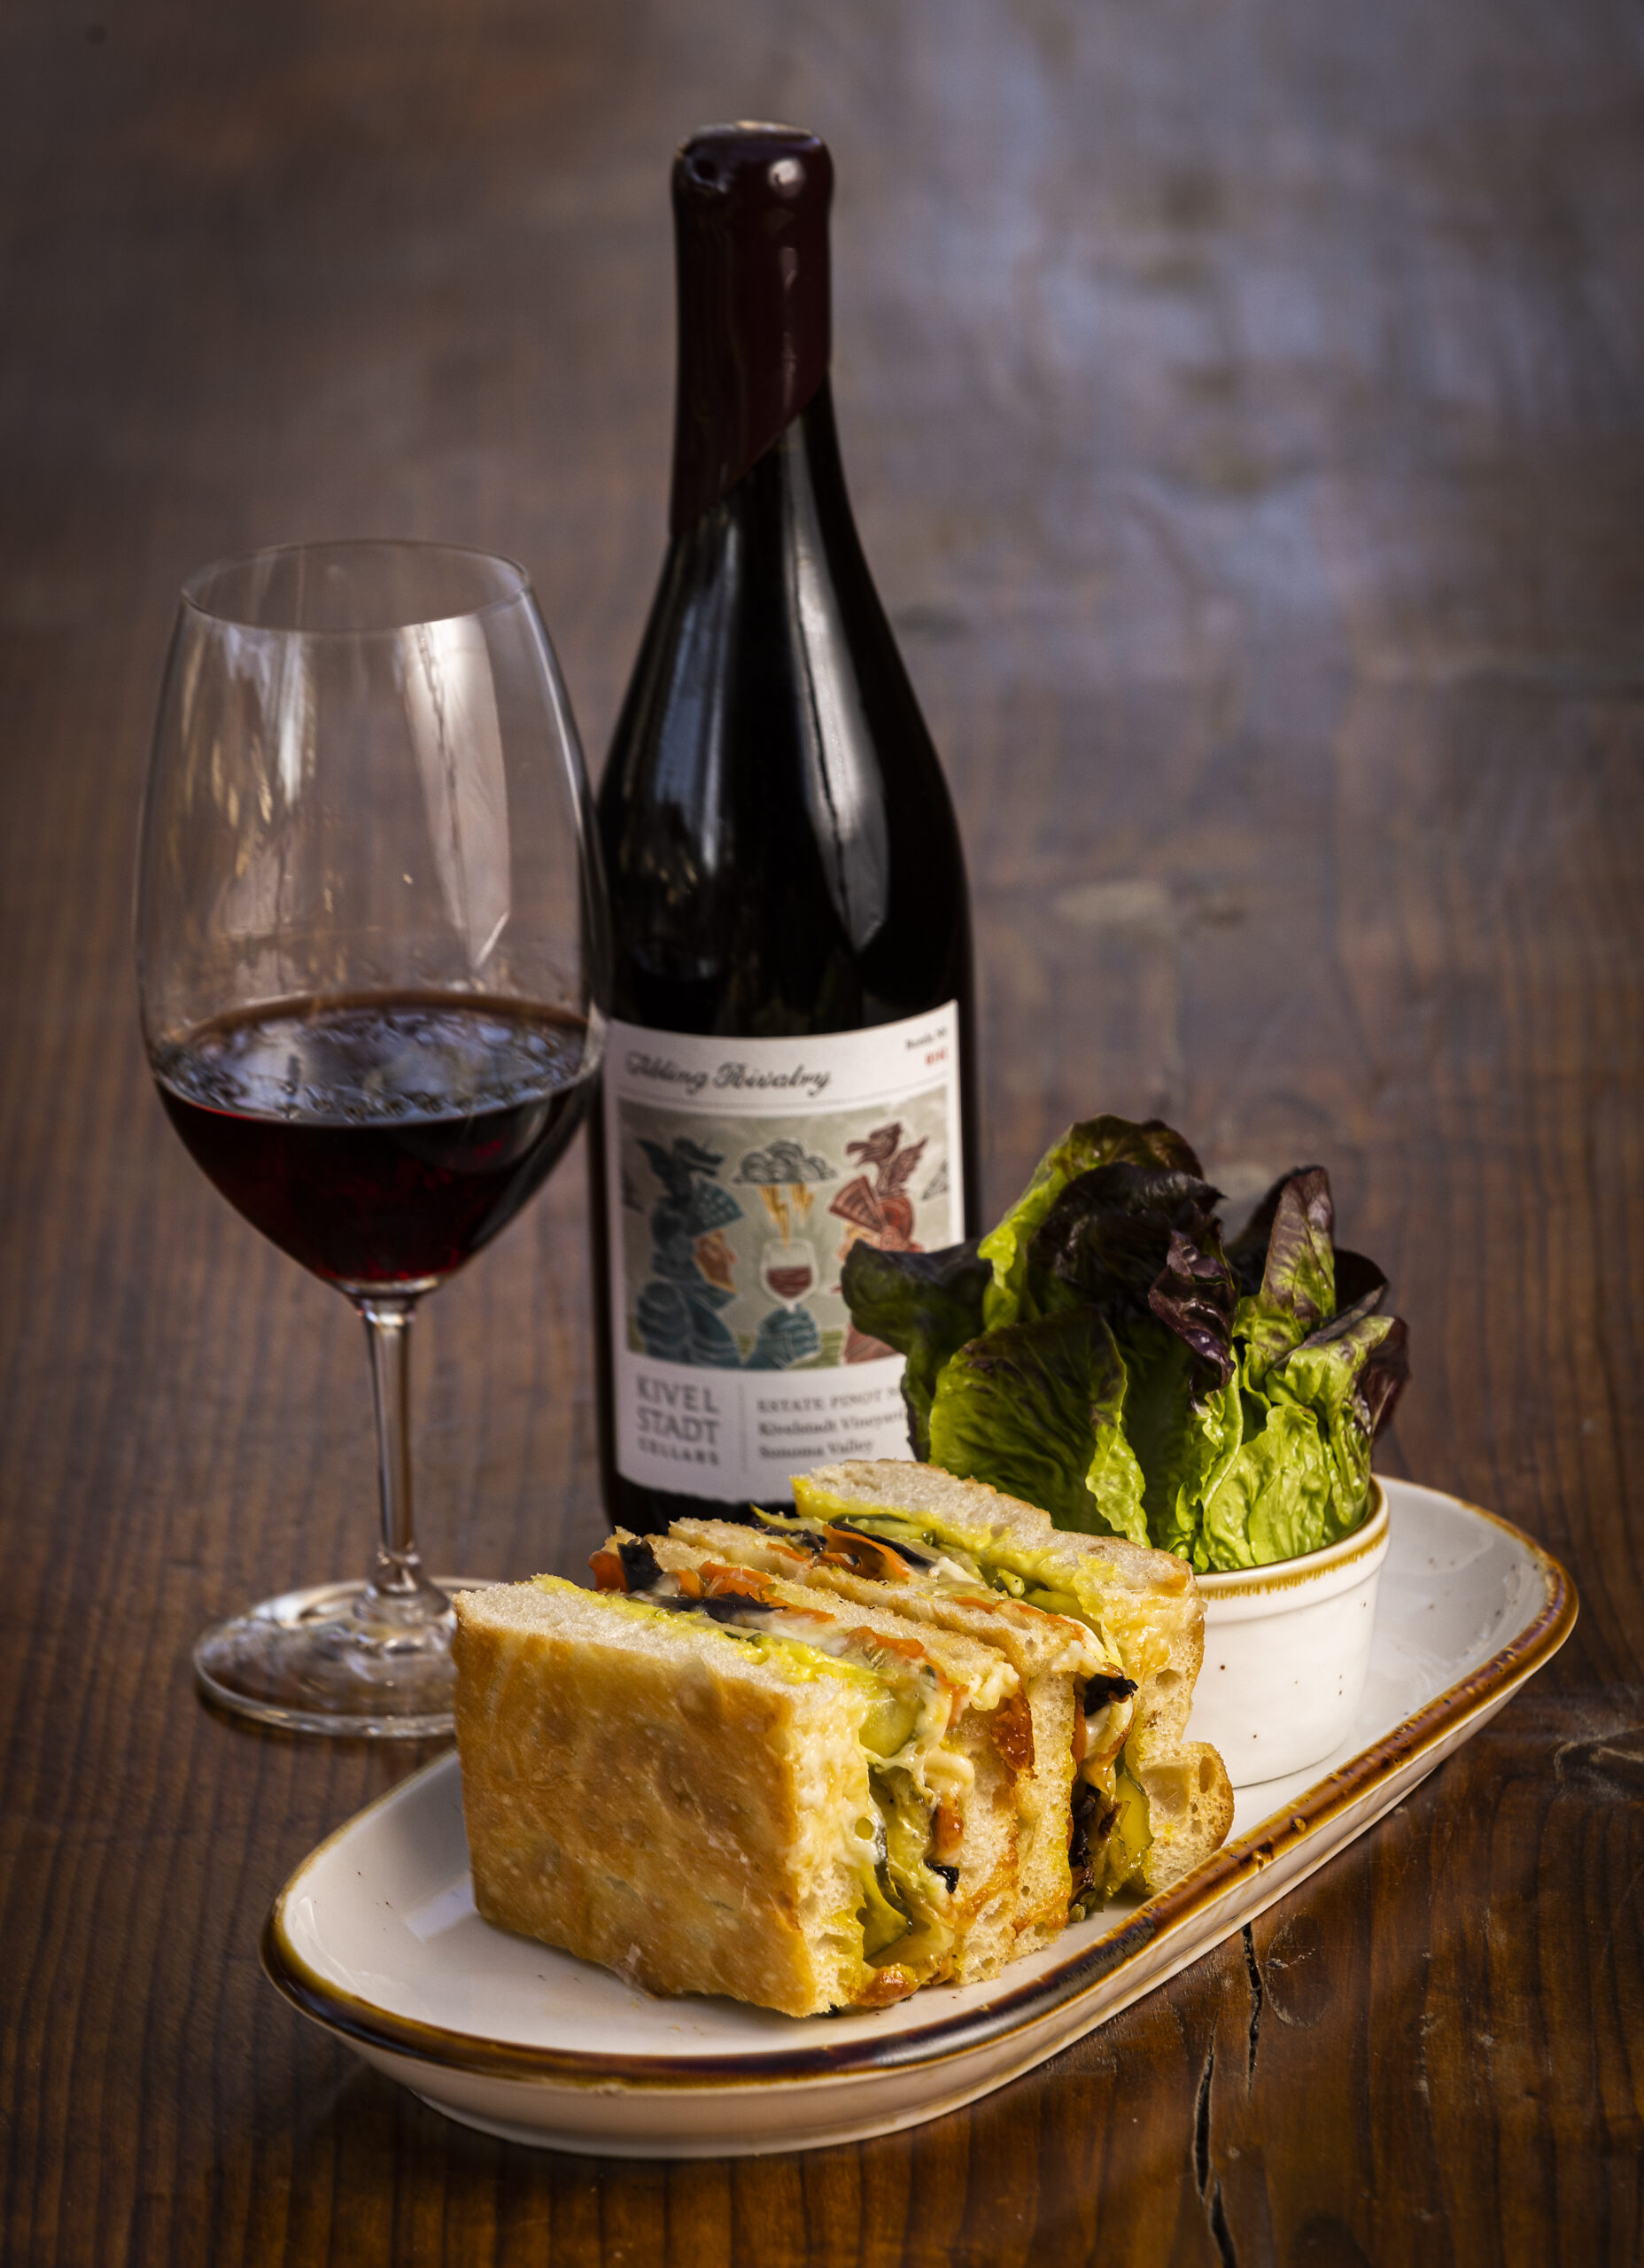 Mushroom Cubano with a pinot noir from Kivelstadt Cellars and WineGarten at the corner of Hwy 12 and Hwy 121 in Sonoma Thursday, October 20, 2022. (John Burgess/The Press Democrat)